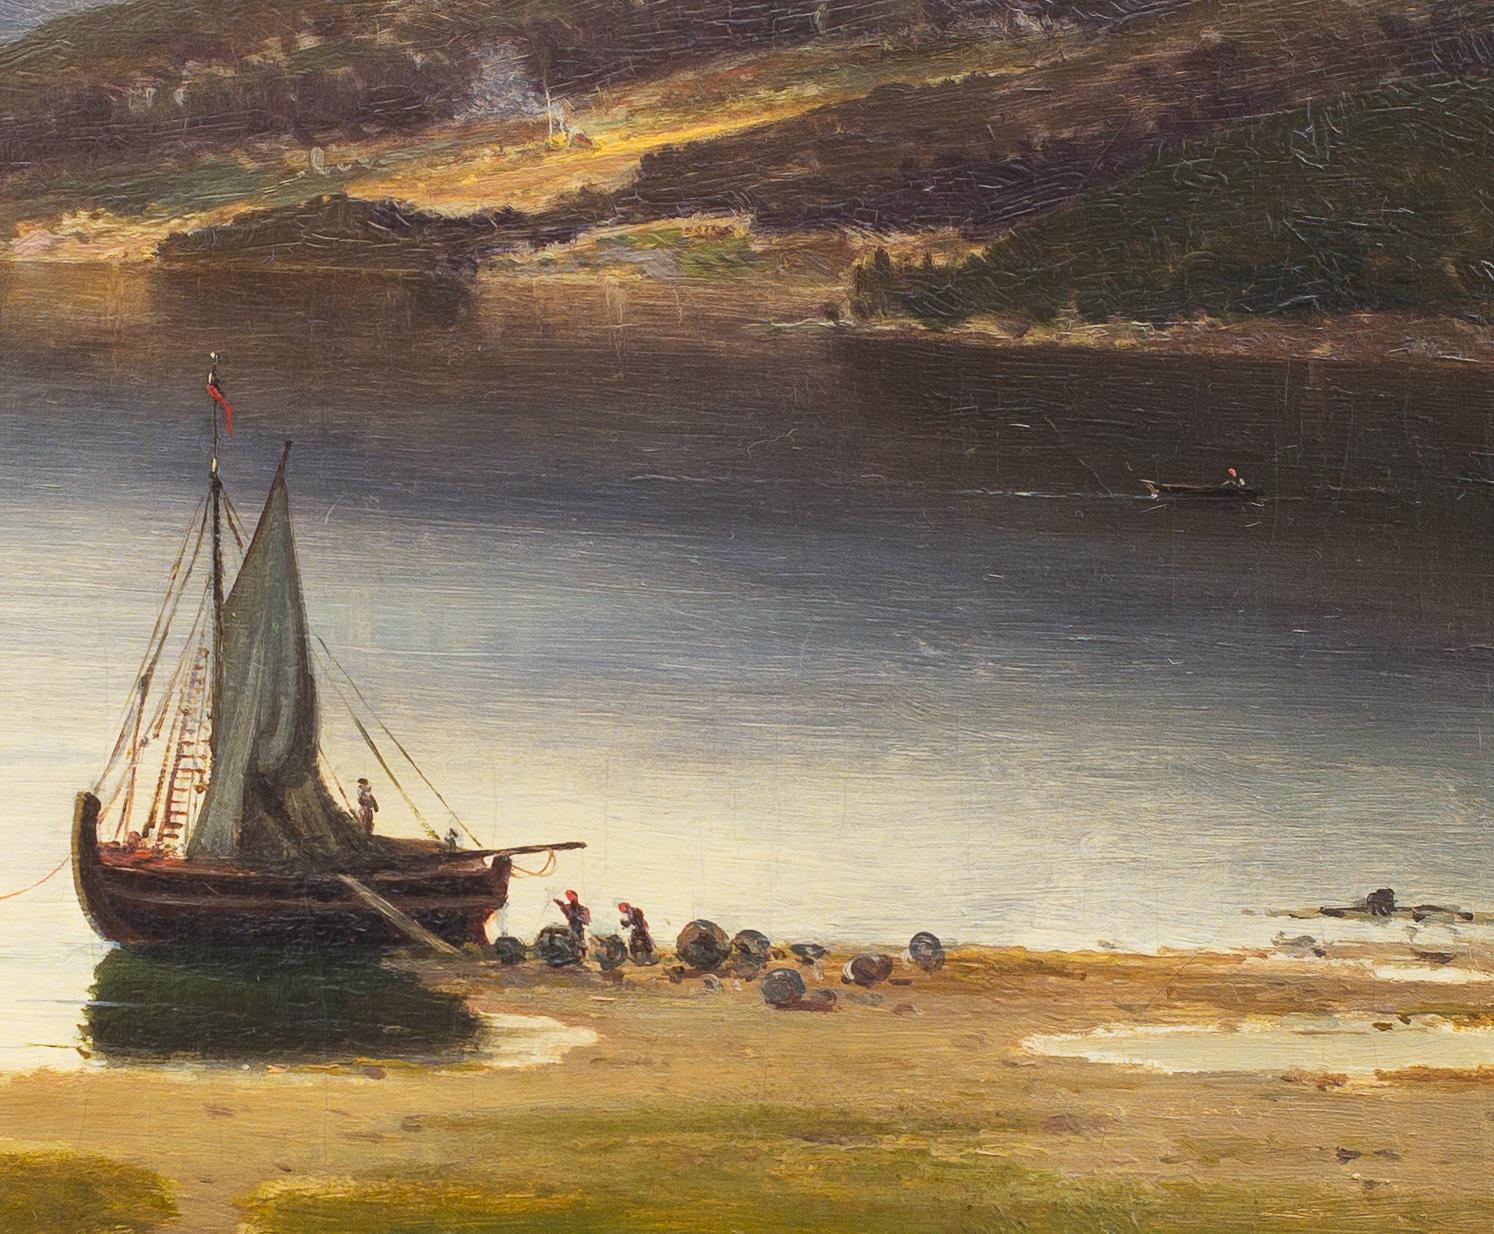 Setting Out in the Fjords 1858 by Swedish Artist Axel Nordgren, Oil on Canvas 1